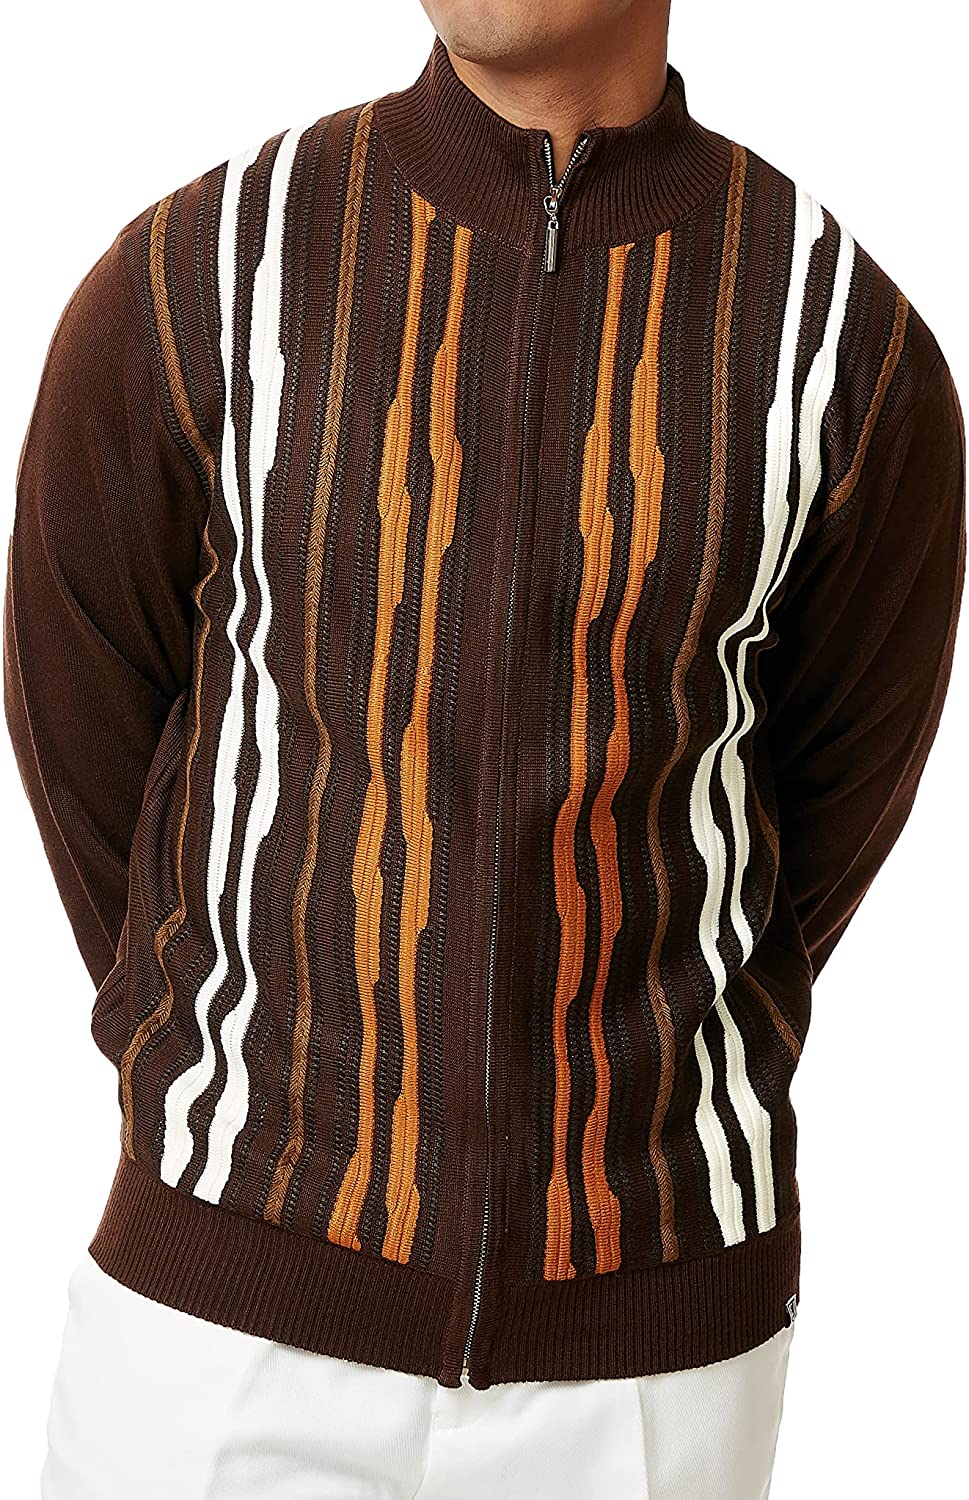 STACY ADAMS Mens Full Zippered Winter Sweaters 